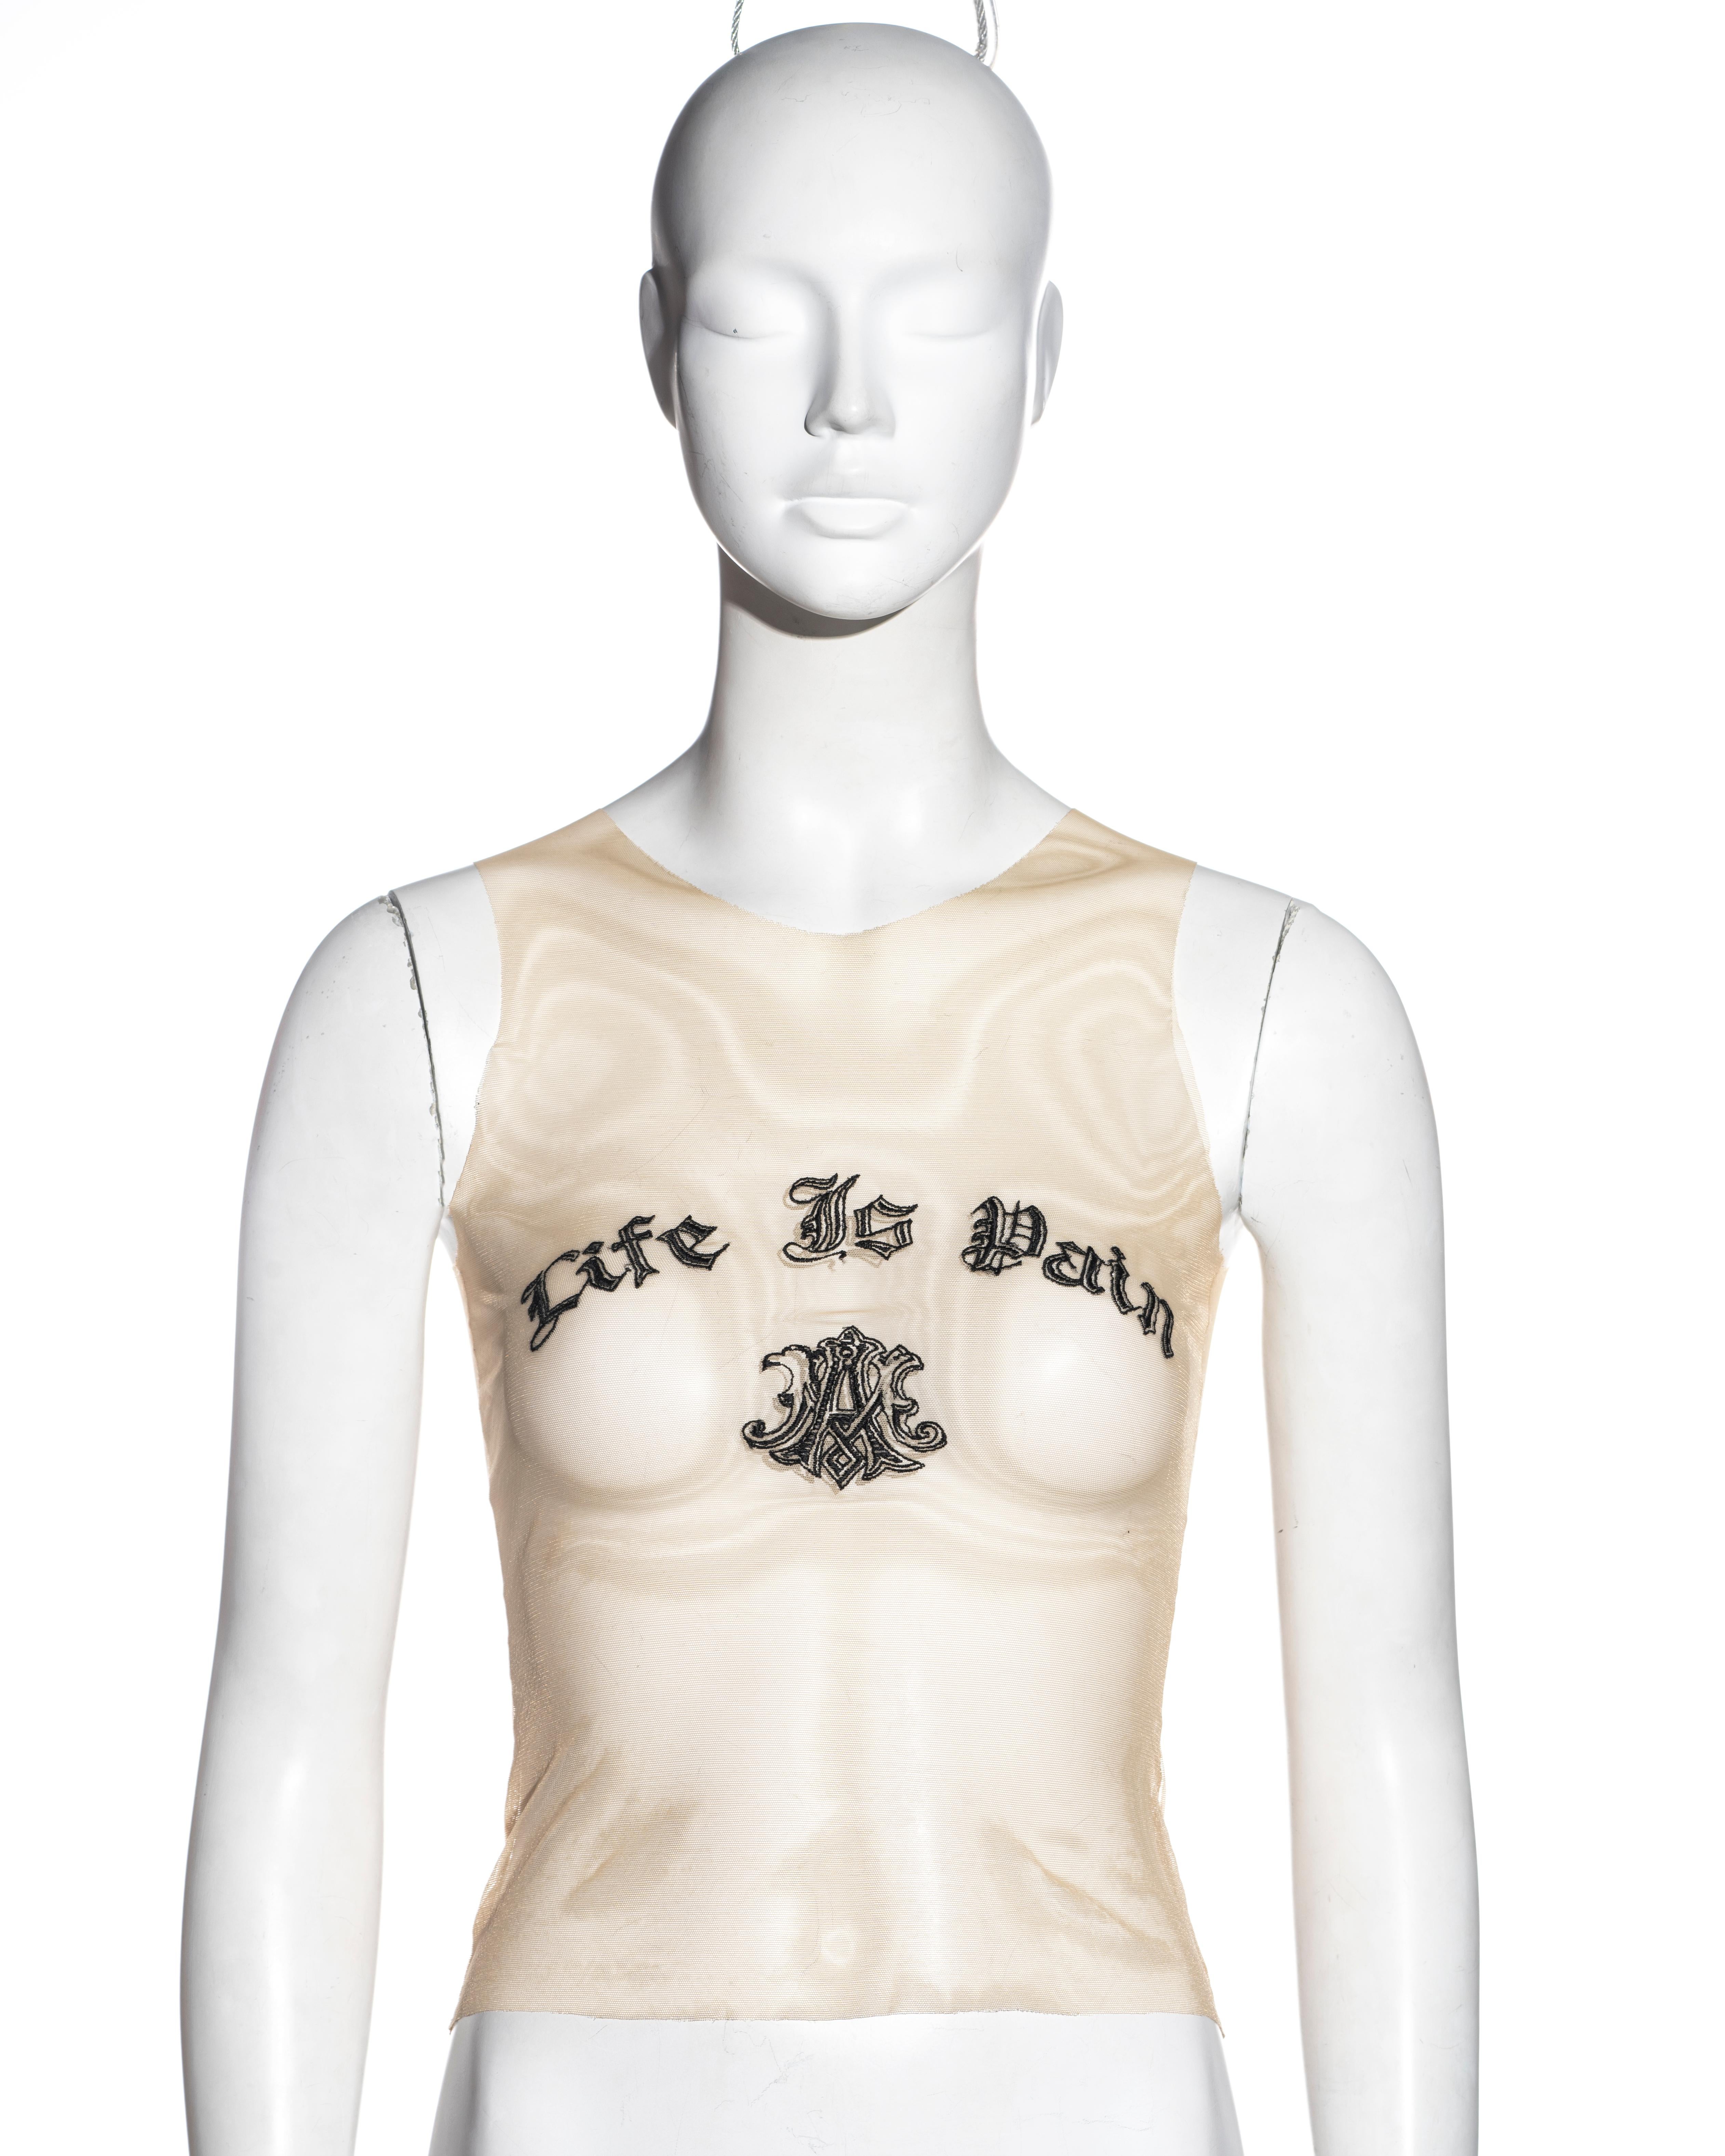 ▪ Alexander McQueen embroidered tank top 
▪ Nude nylon mesh 
▪ Embroidered 